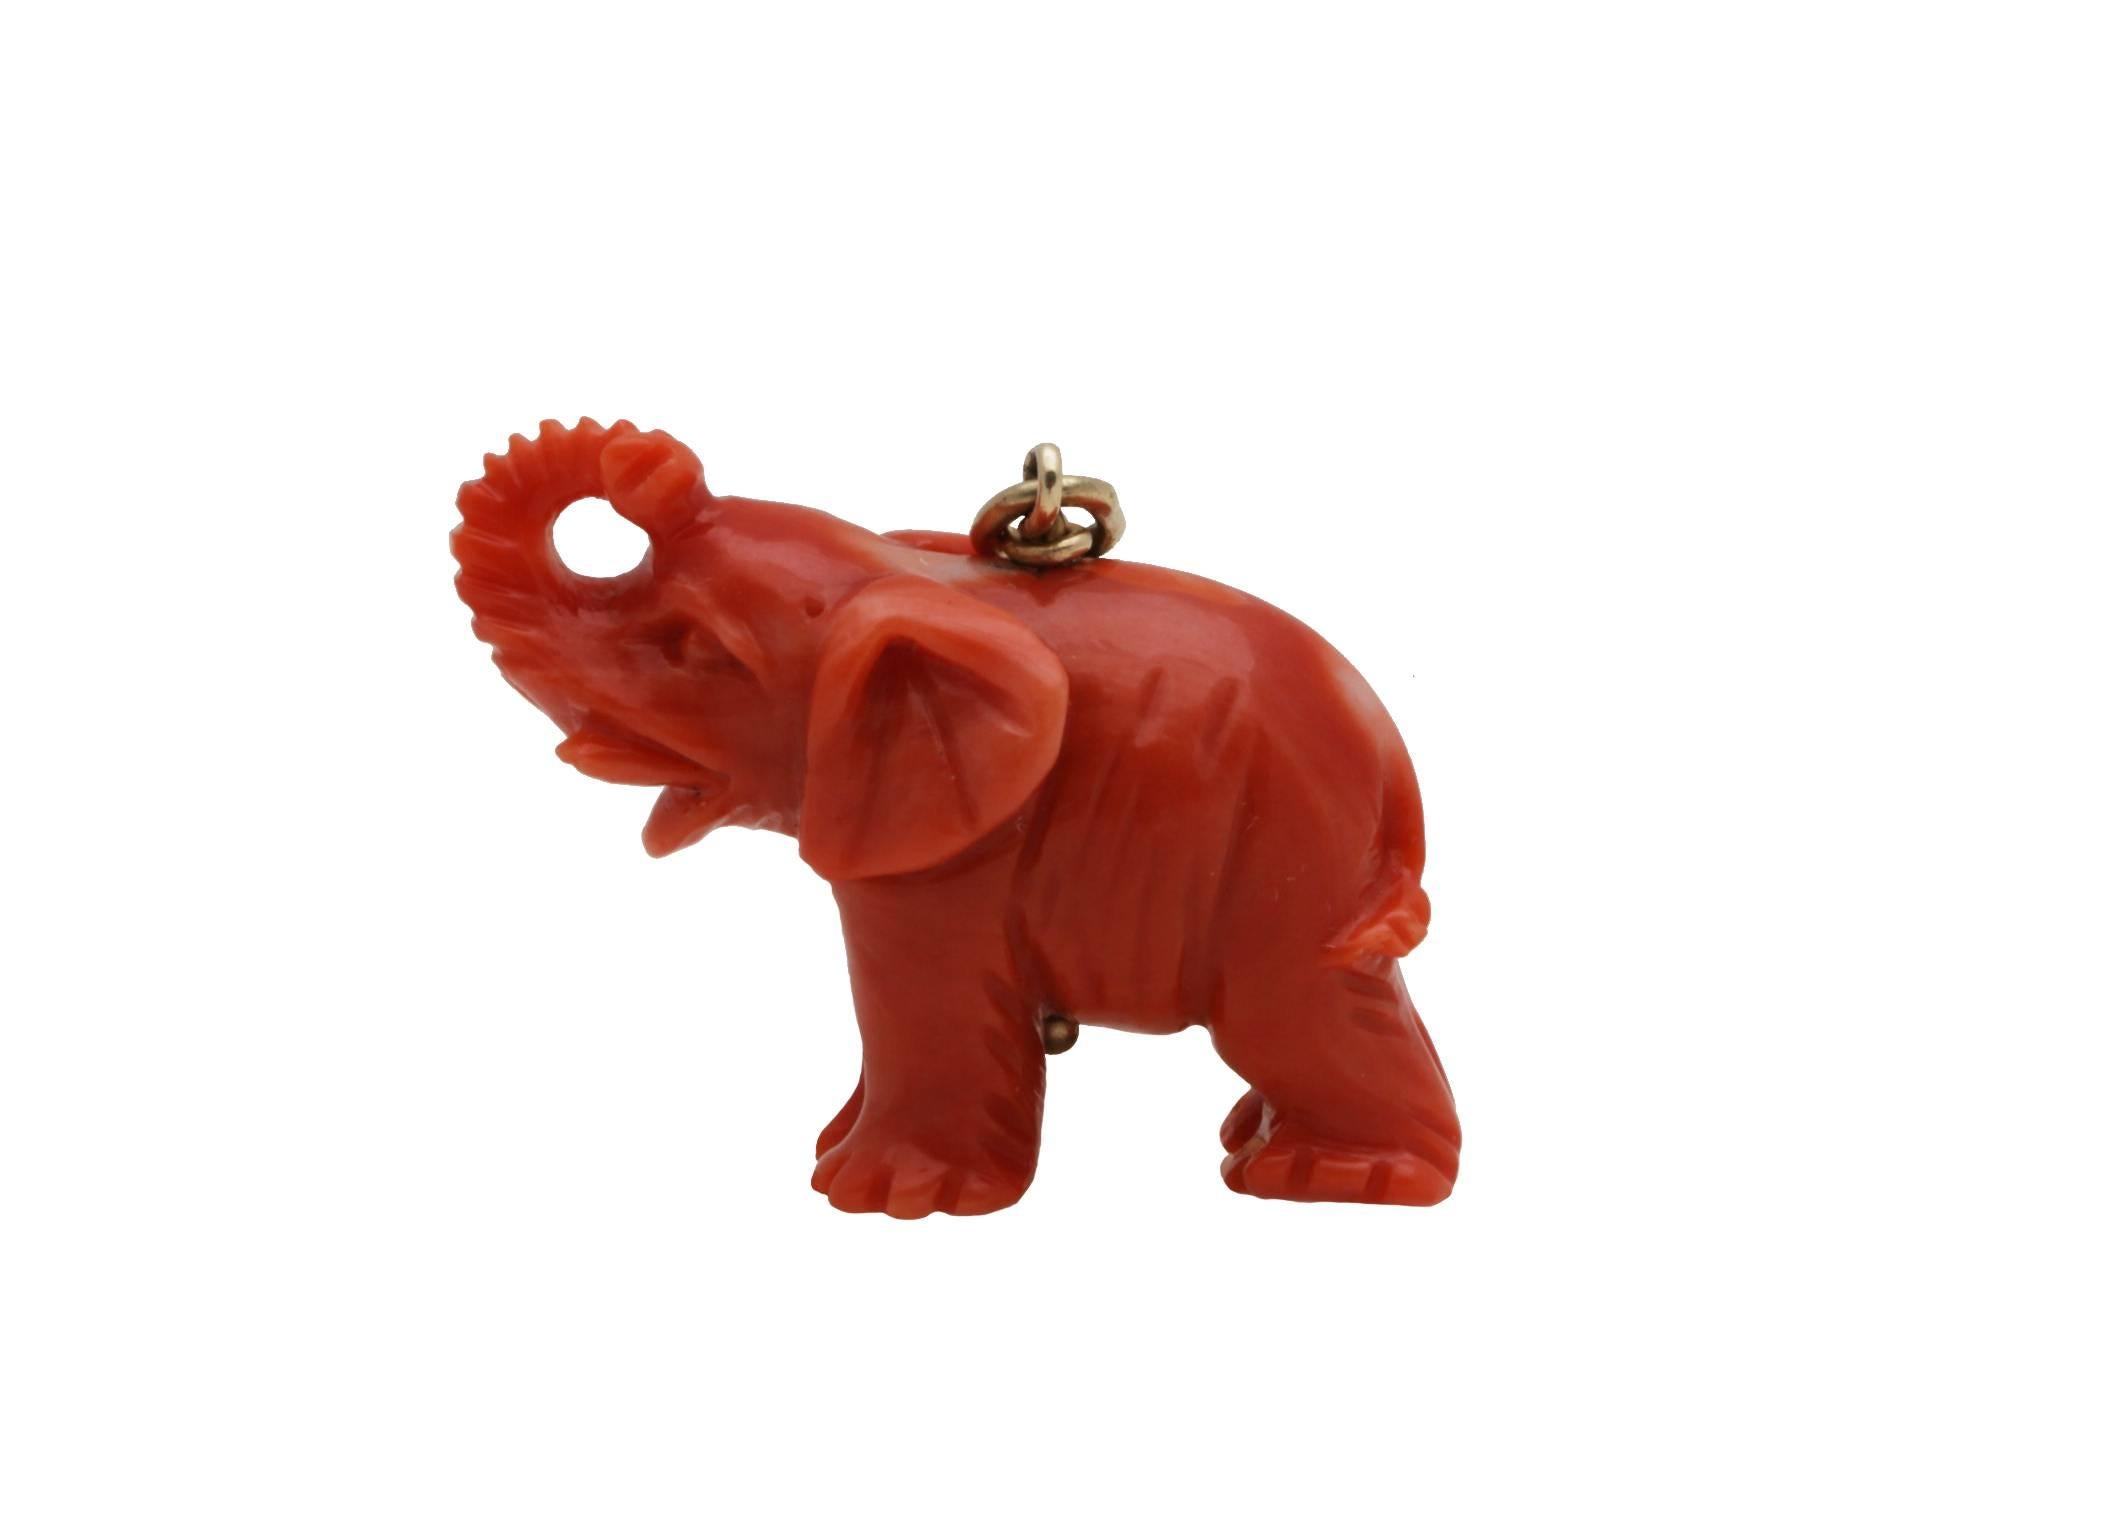 Vintage Cartier Coral Elephant Keychain with 14K Gold Chain and Ring. Coral Elephant Dimensions:  Length 1.20